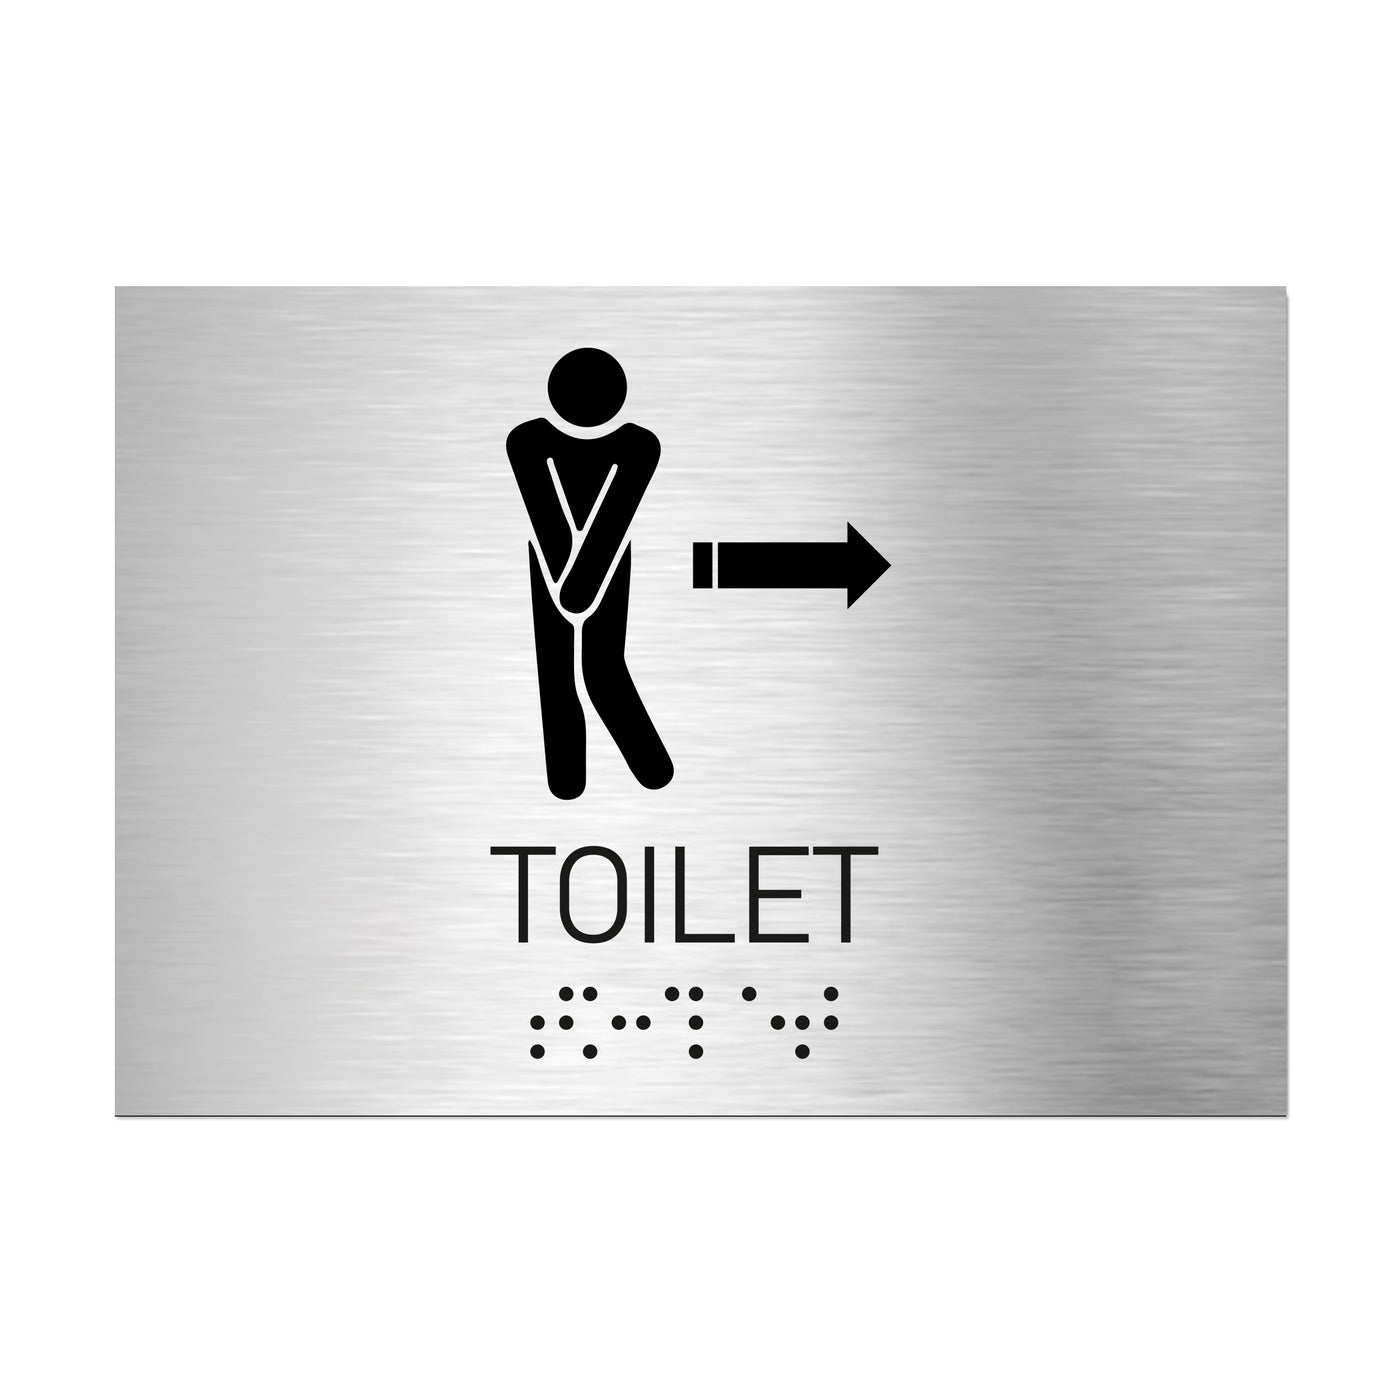 Bathroom Signs - Men Toilet Directional Sign - Stainless Steel